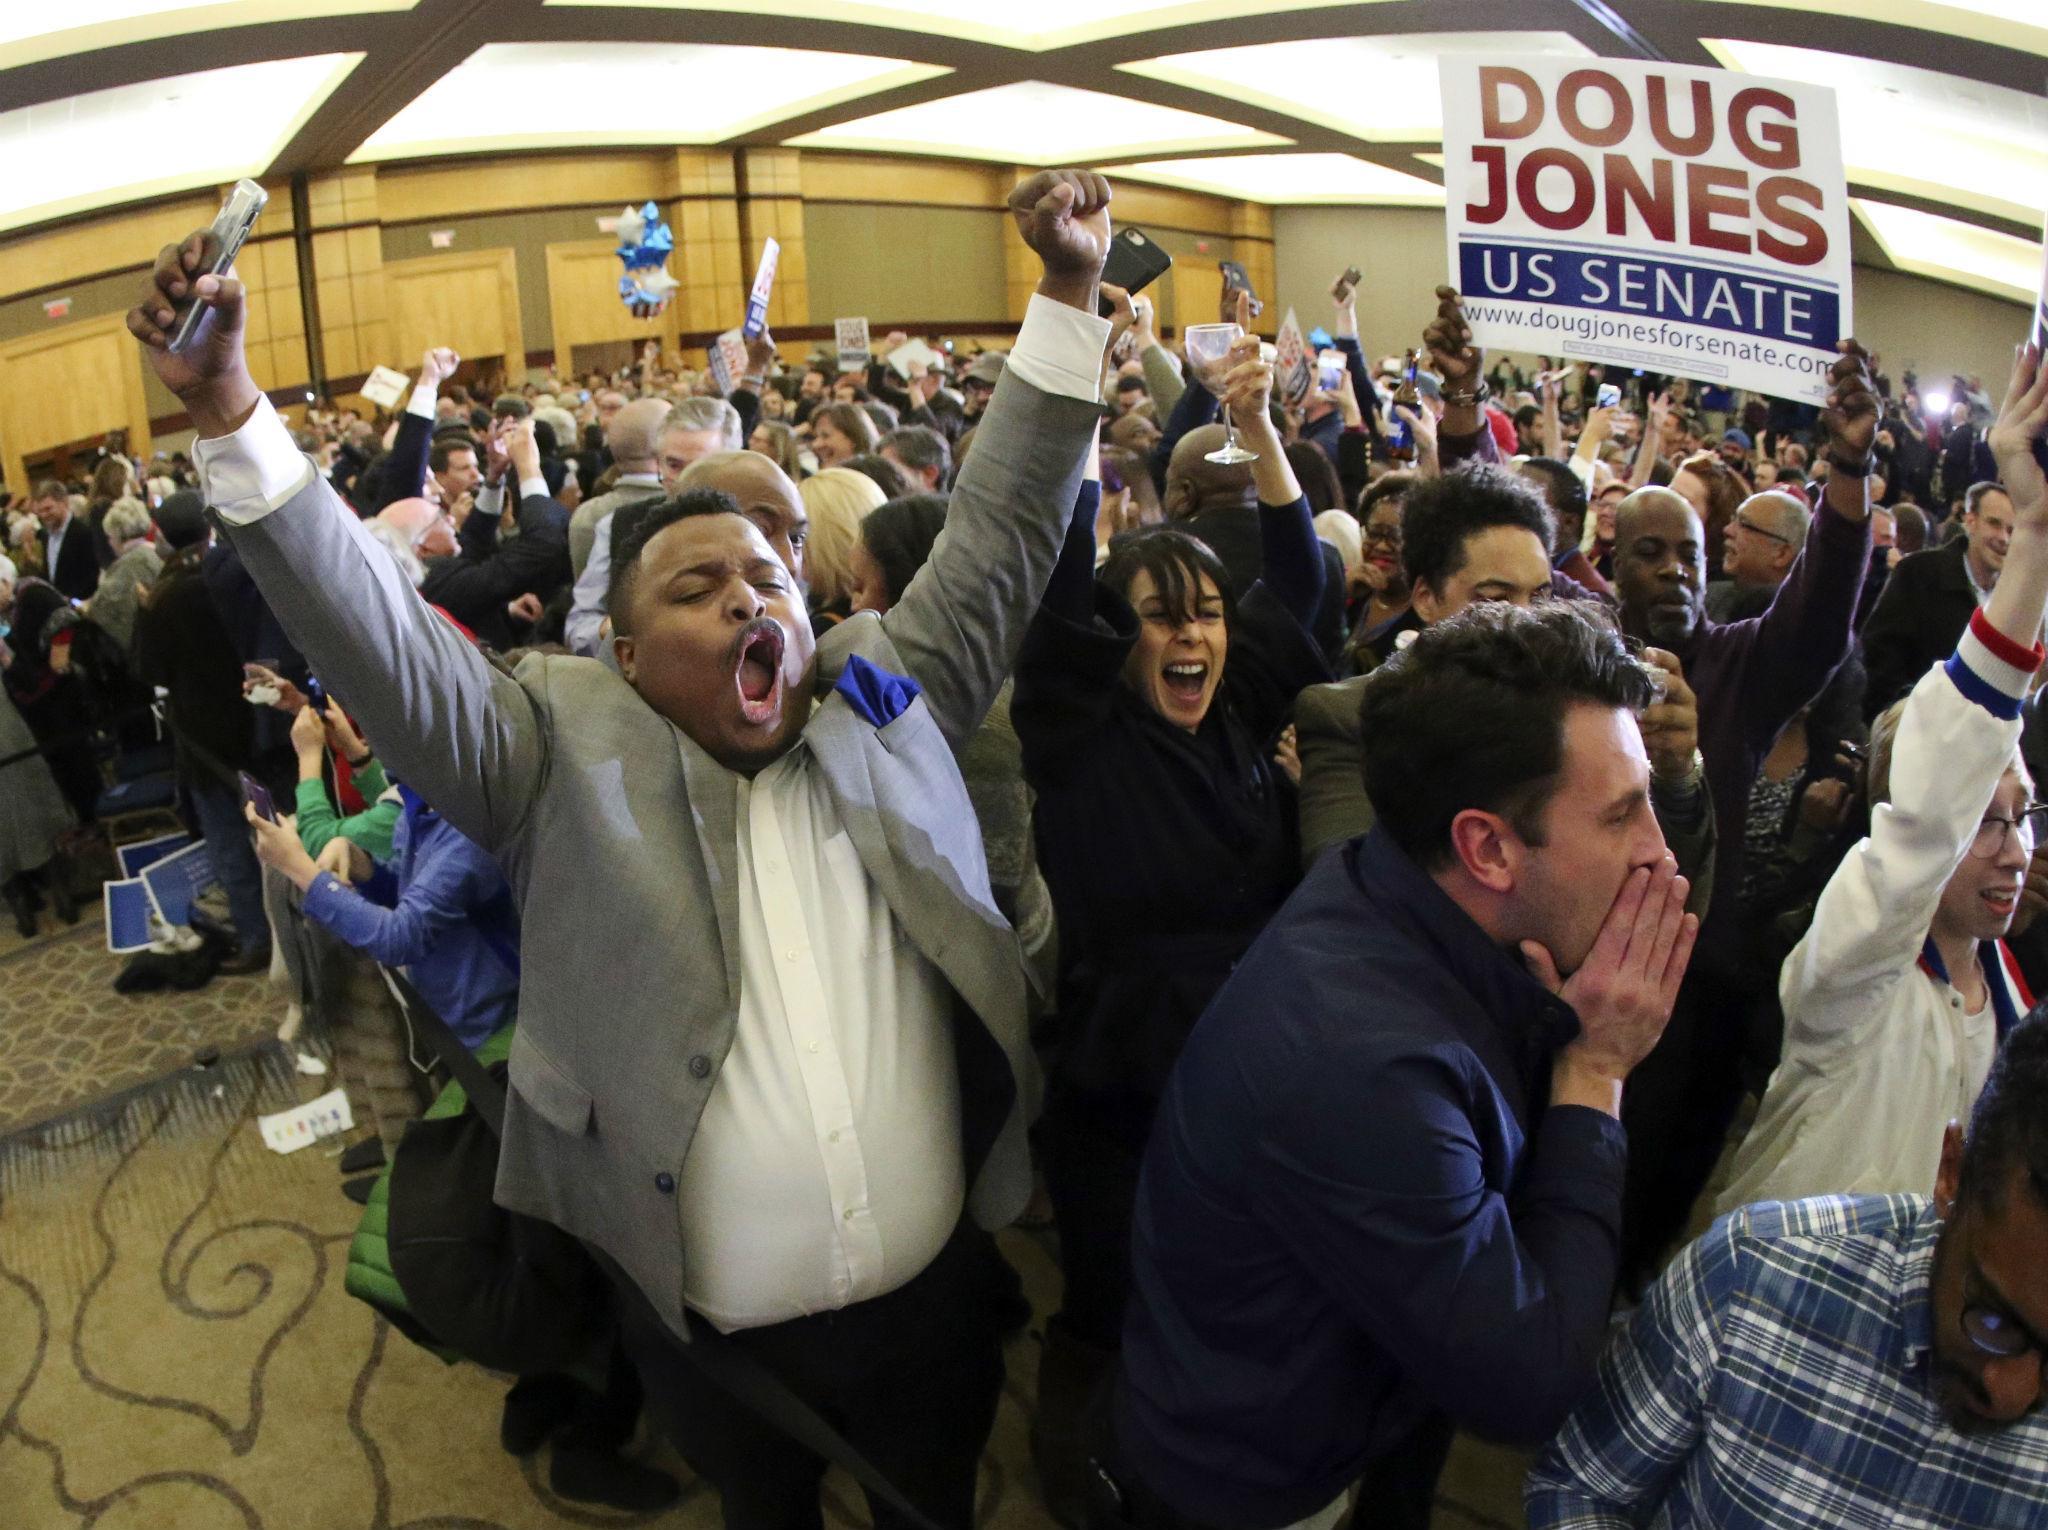 Supporters of Doug Jones erupt is celebration during an election-night watch party Tuesday, Dec. 12, 2017, in Birmingham, Ala